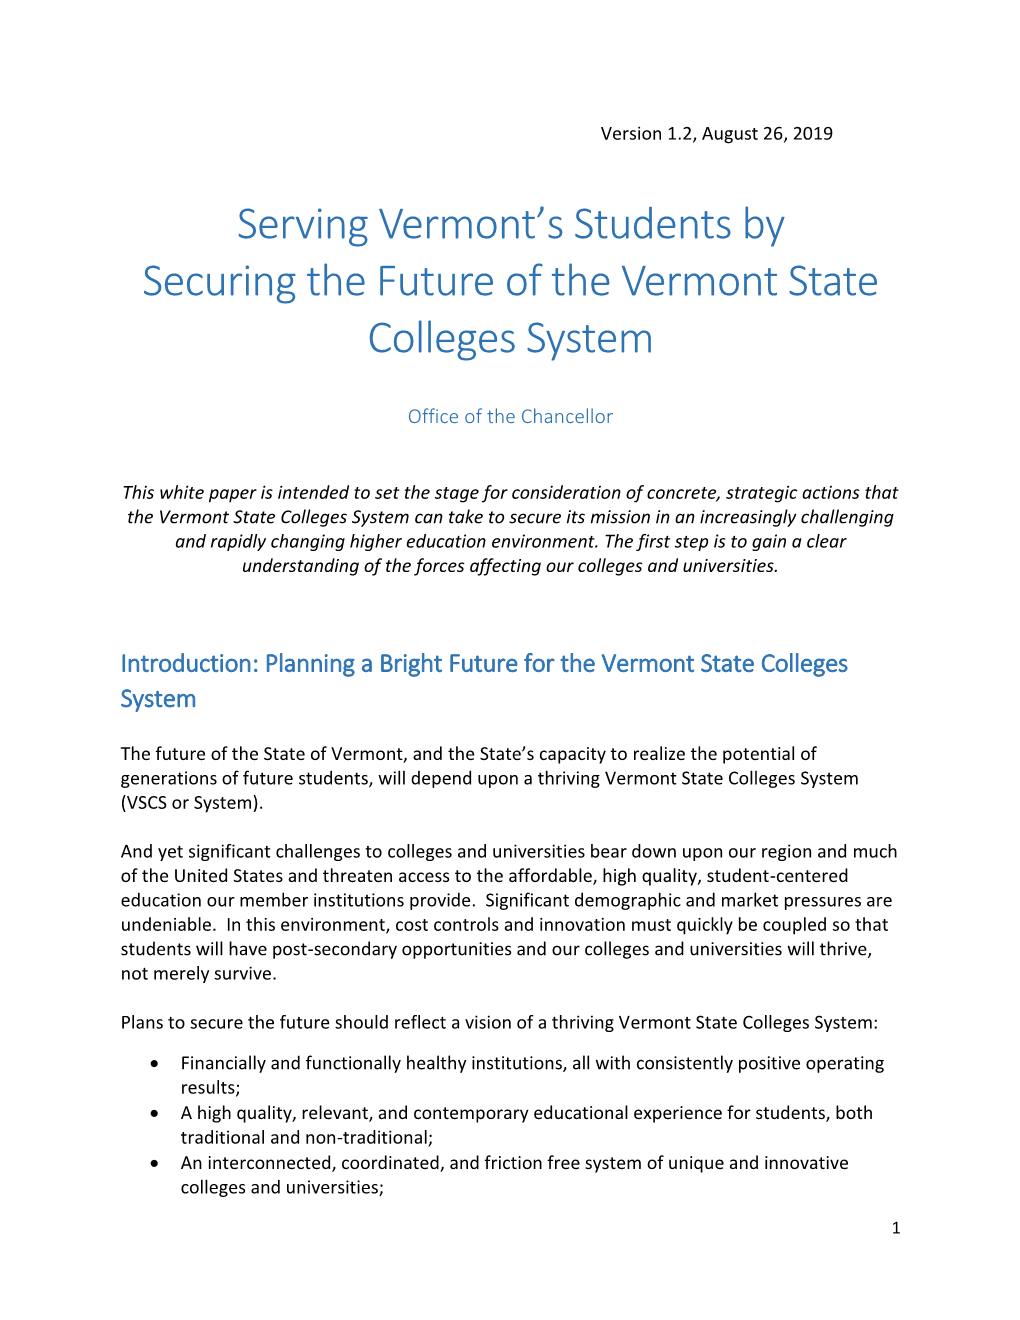 Serving Vermont's Students by Securing the Future of the Vermont